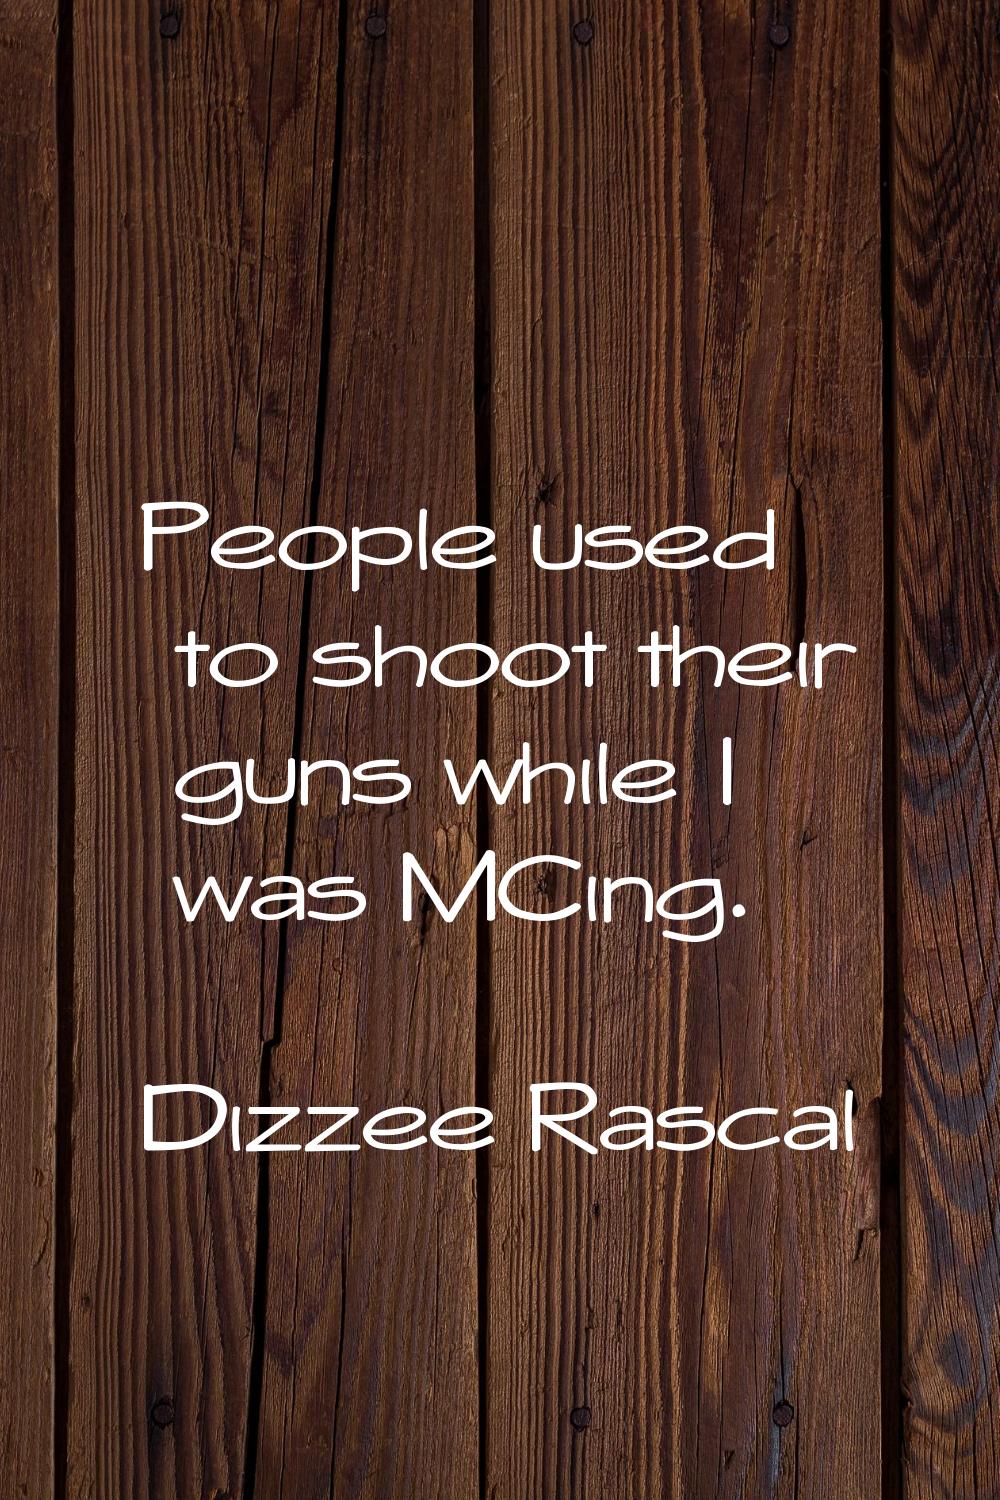 People used to shoot their guns while I was MCing.